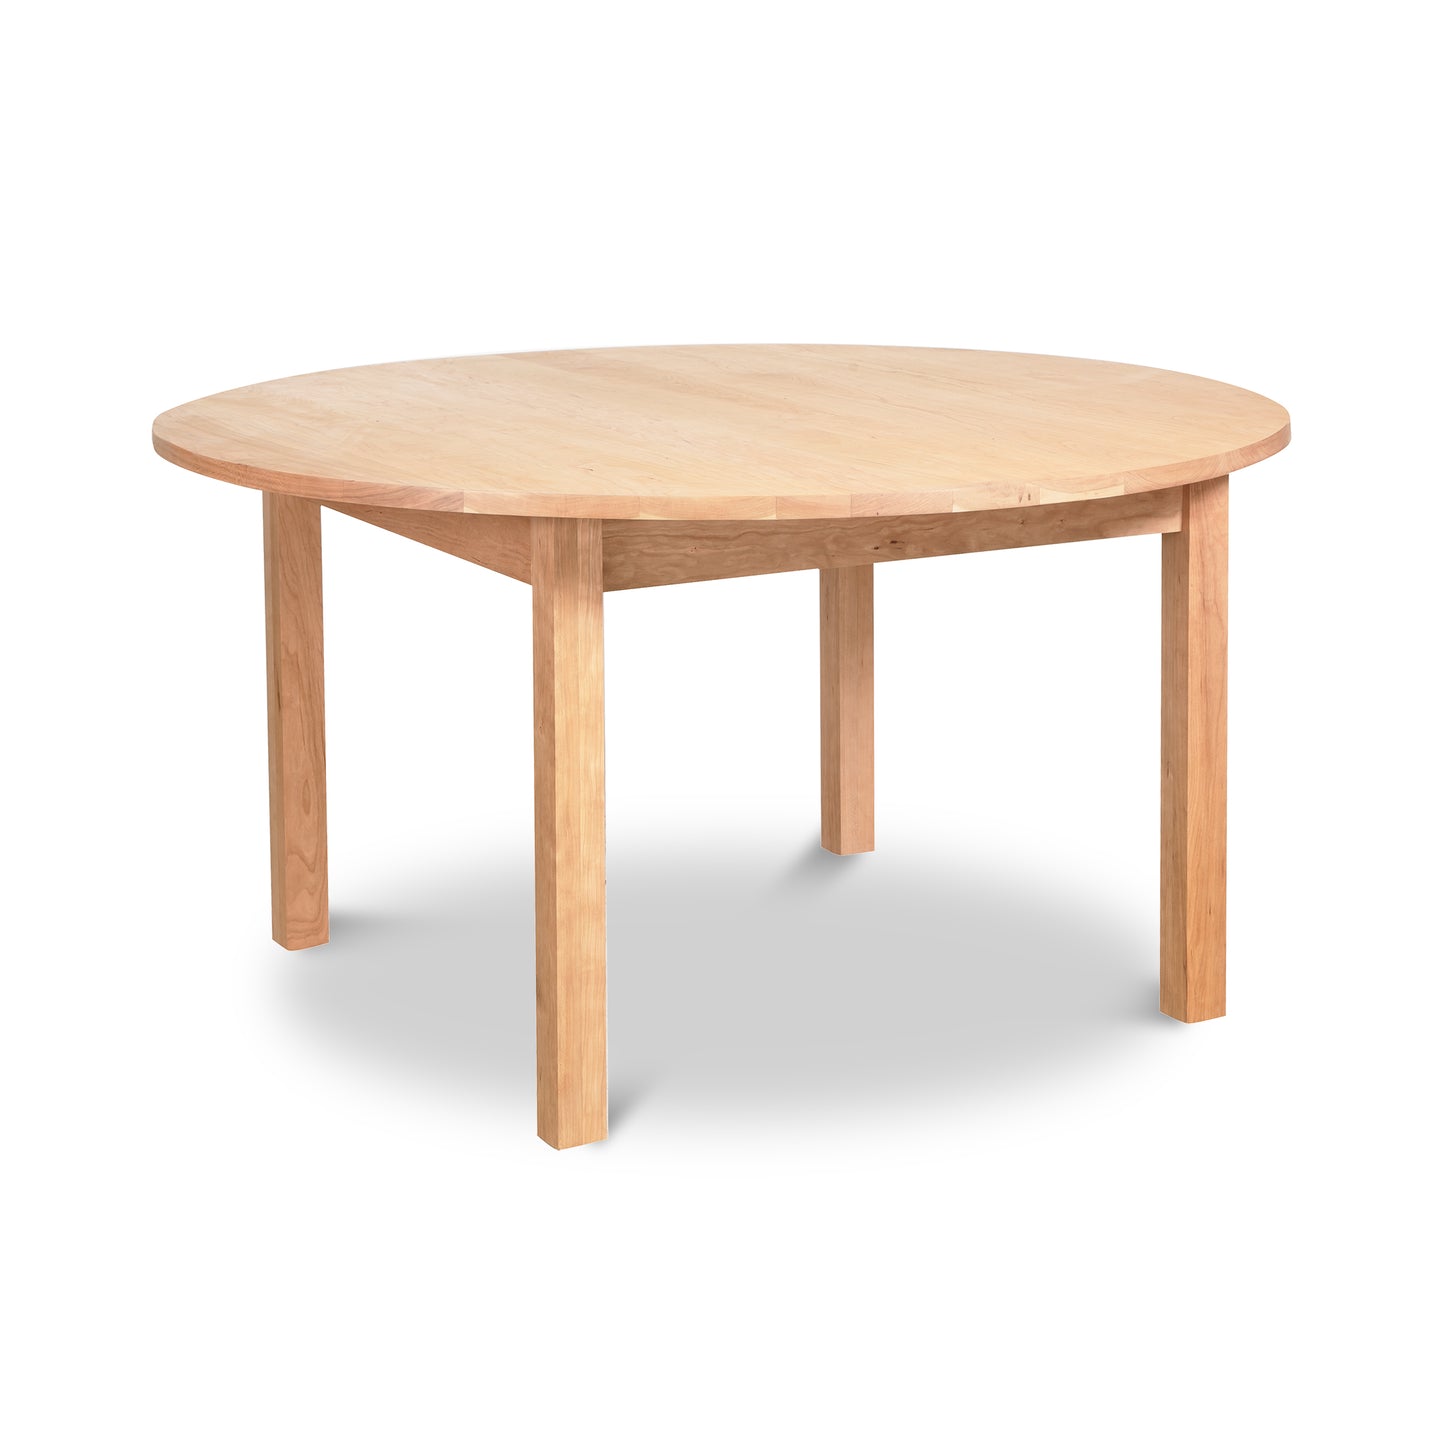 A simple round Vermont Furniture Designs Burlington Shaker Round Solid Top dining table with four legs on a white background.